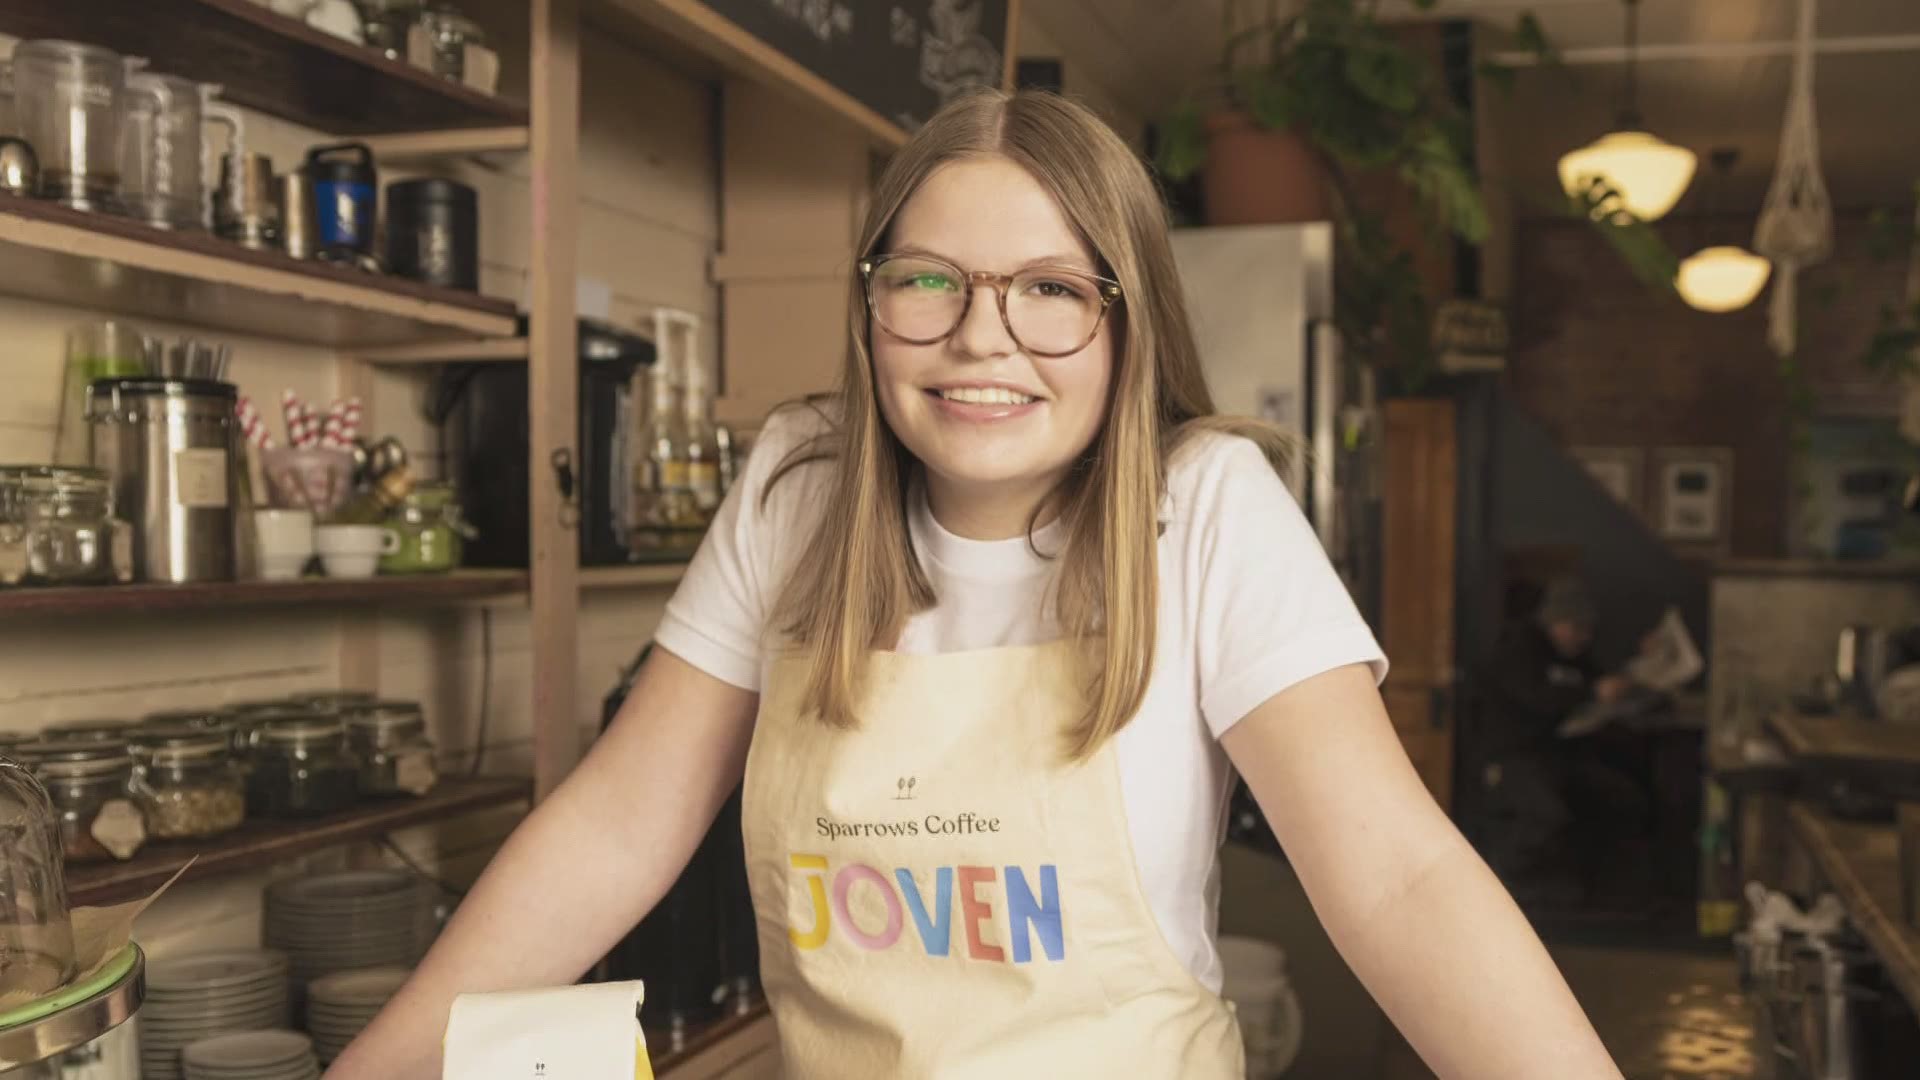 14-year-old Frankie Volkema has spent years hanging around her dad's coffee businesses. Her new coffee line could help secure the industry's future.